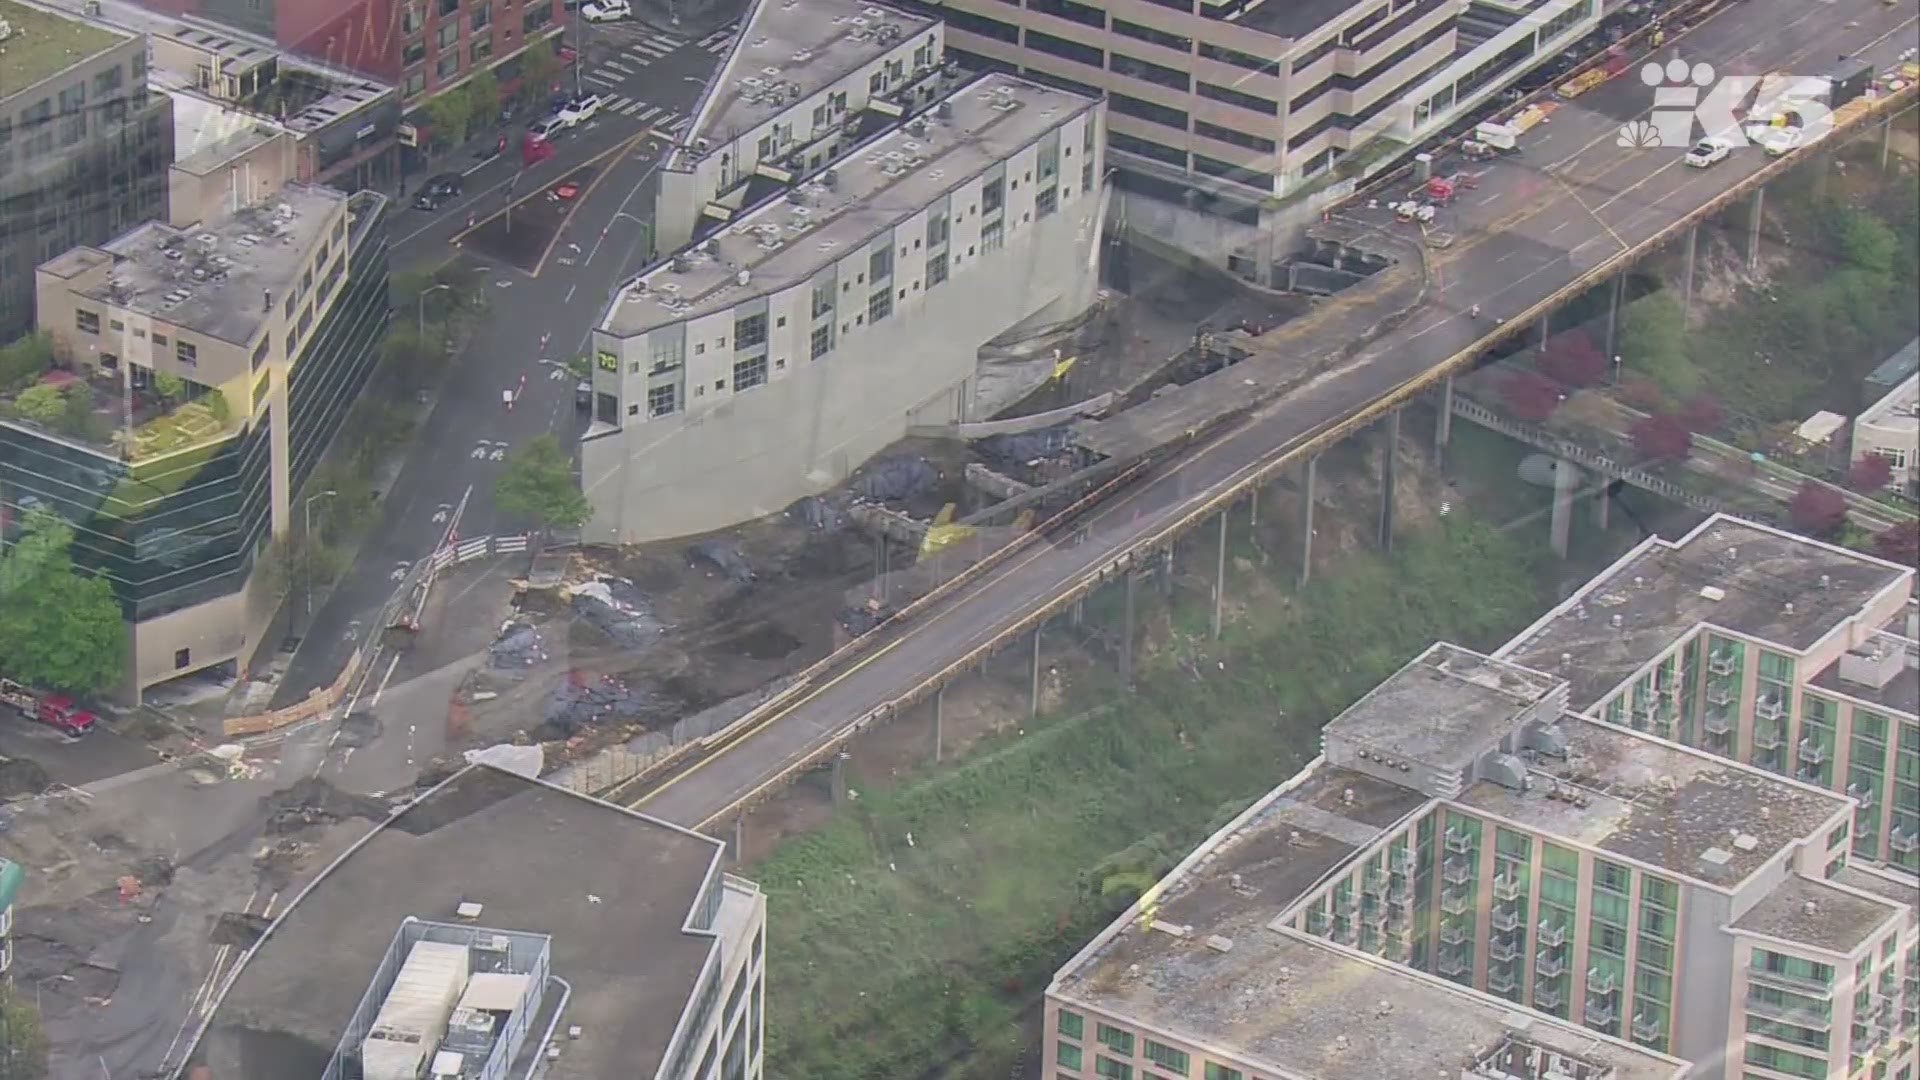 Aerials of demolition work on the Alaskan Way Viaduct in Seattle on April 11, 2019.